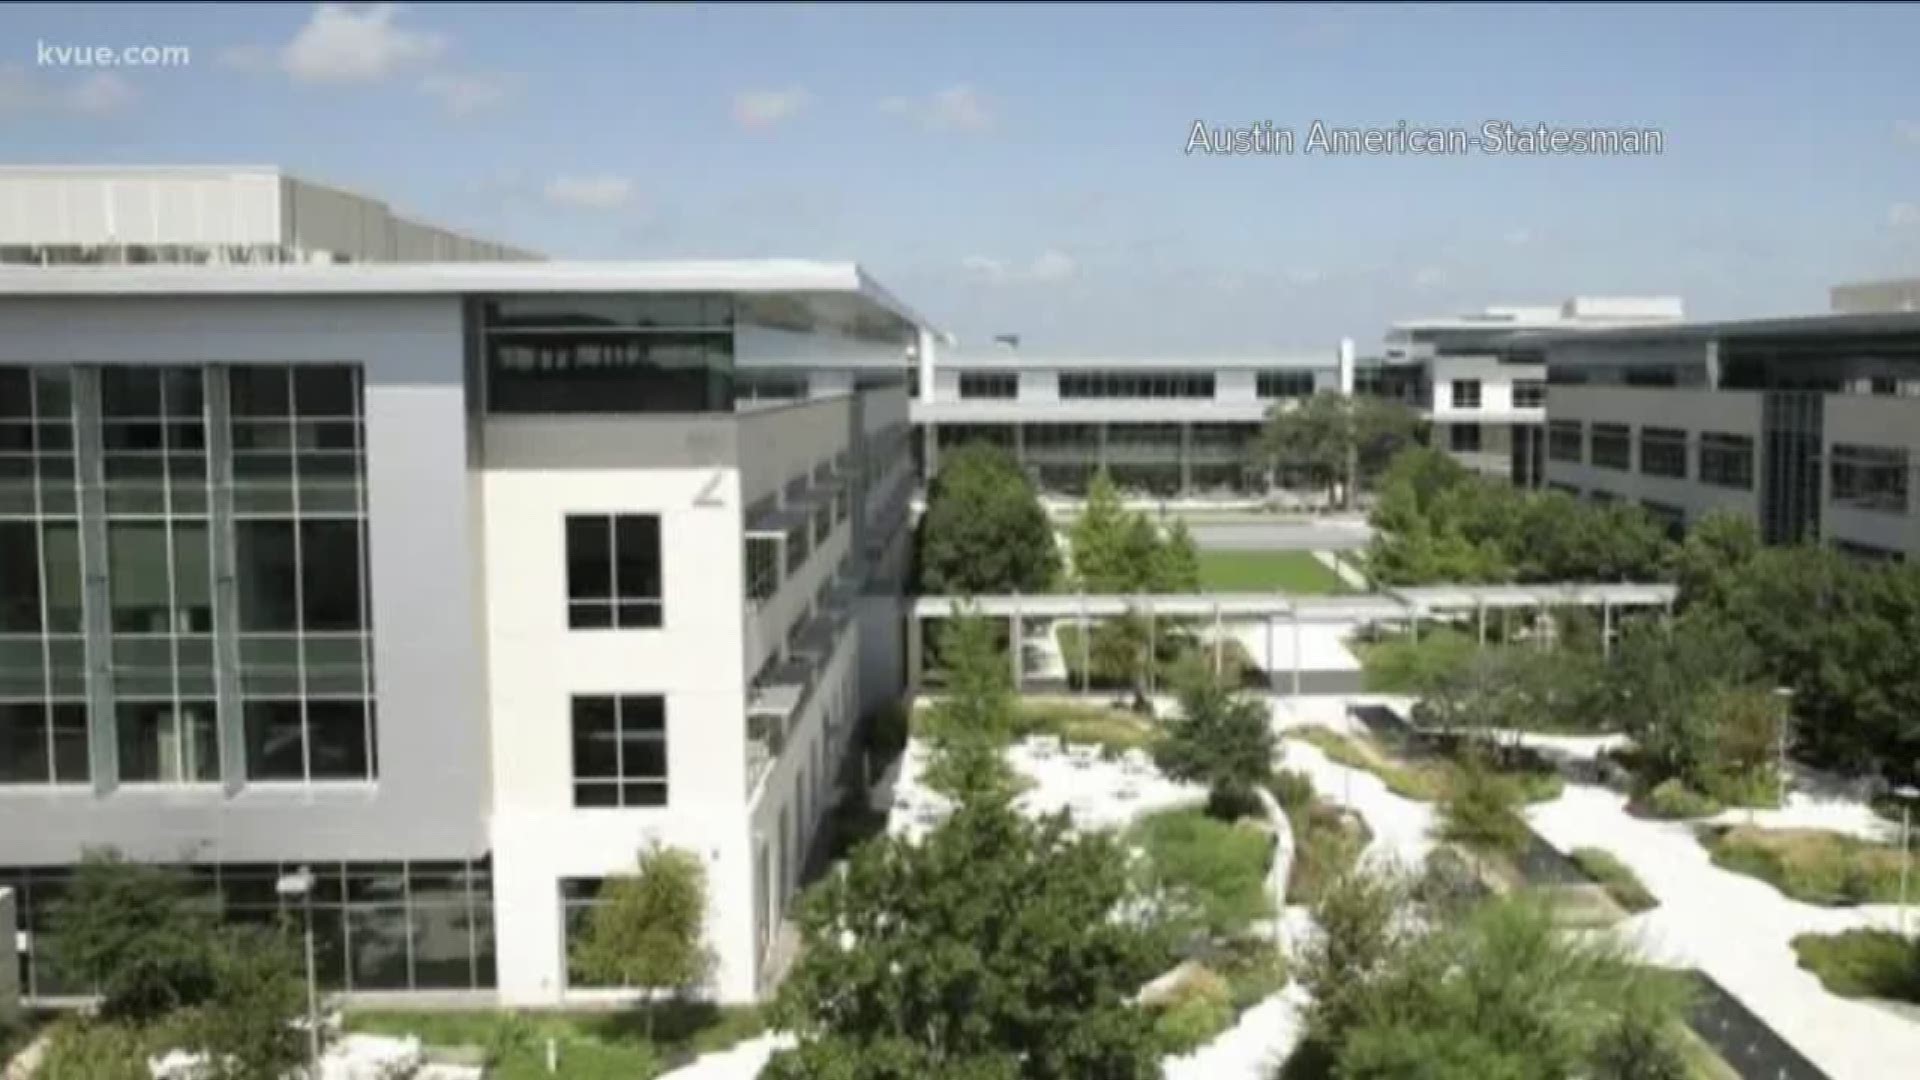 The tech giant announced it's going to build a brand new $1 billion campus in North Austin.